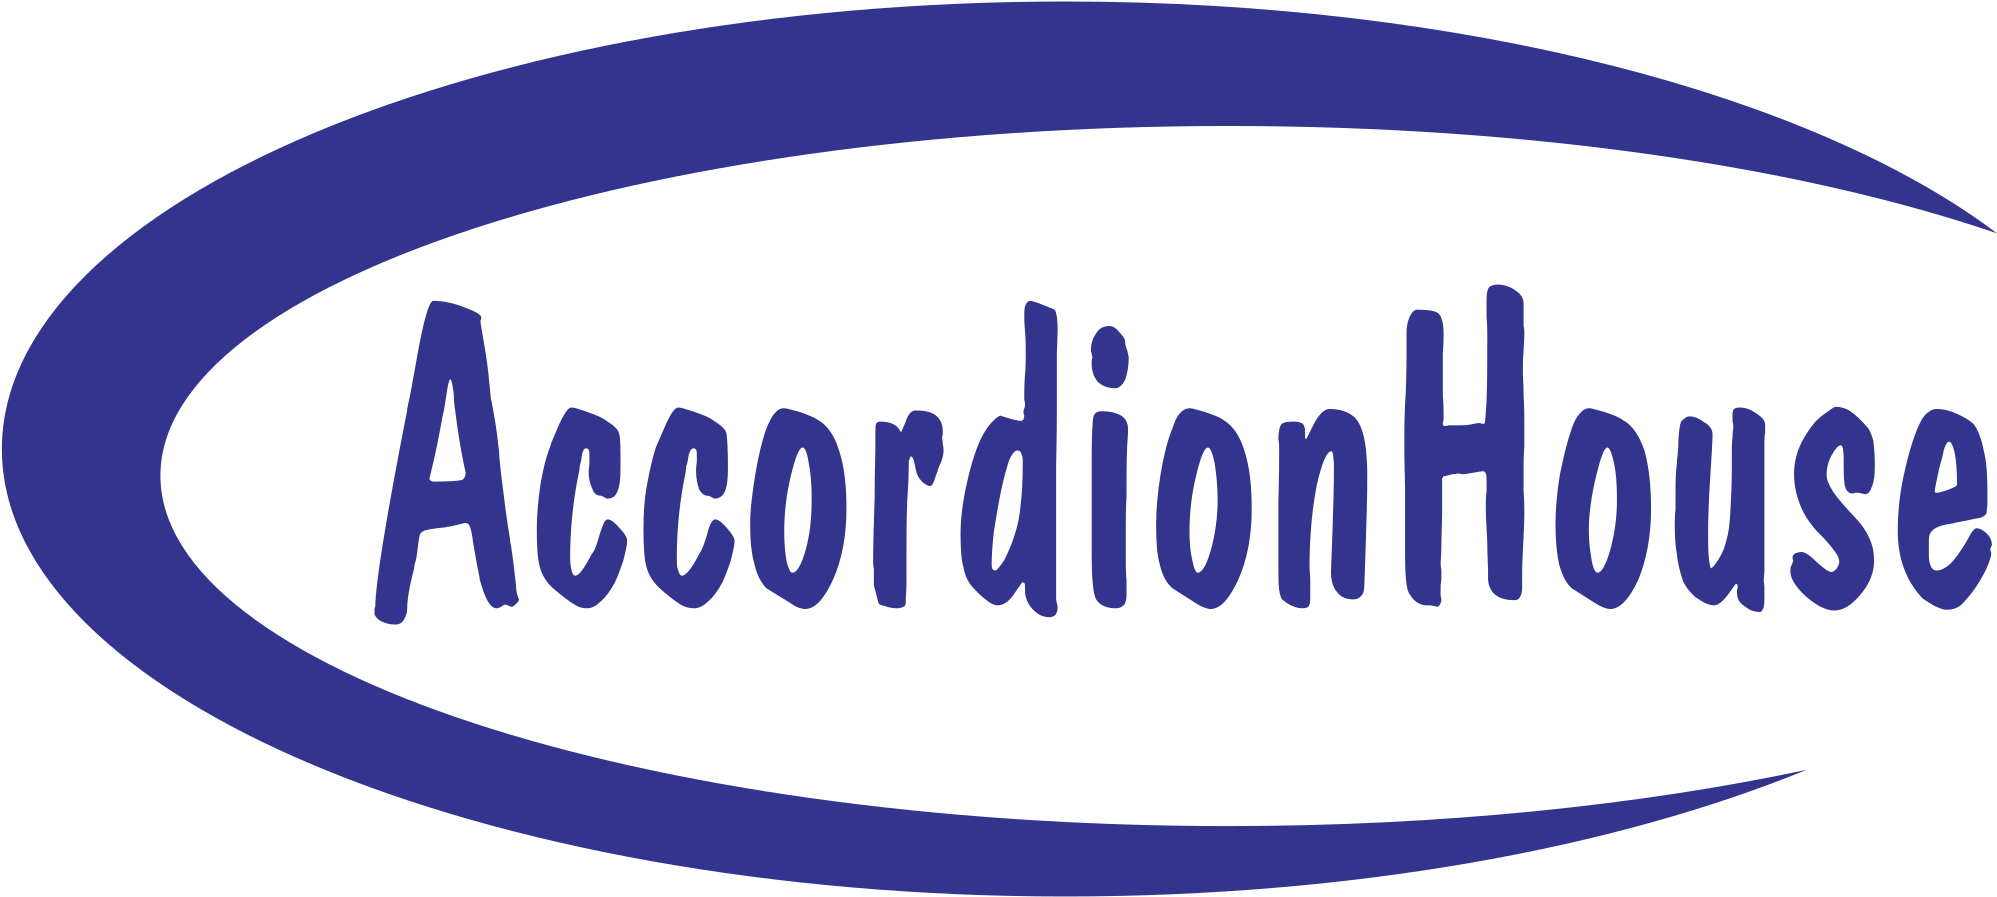 Accordion House Logo Png Transparent - Oval (2400x2400), Png Download